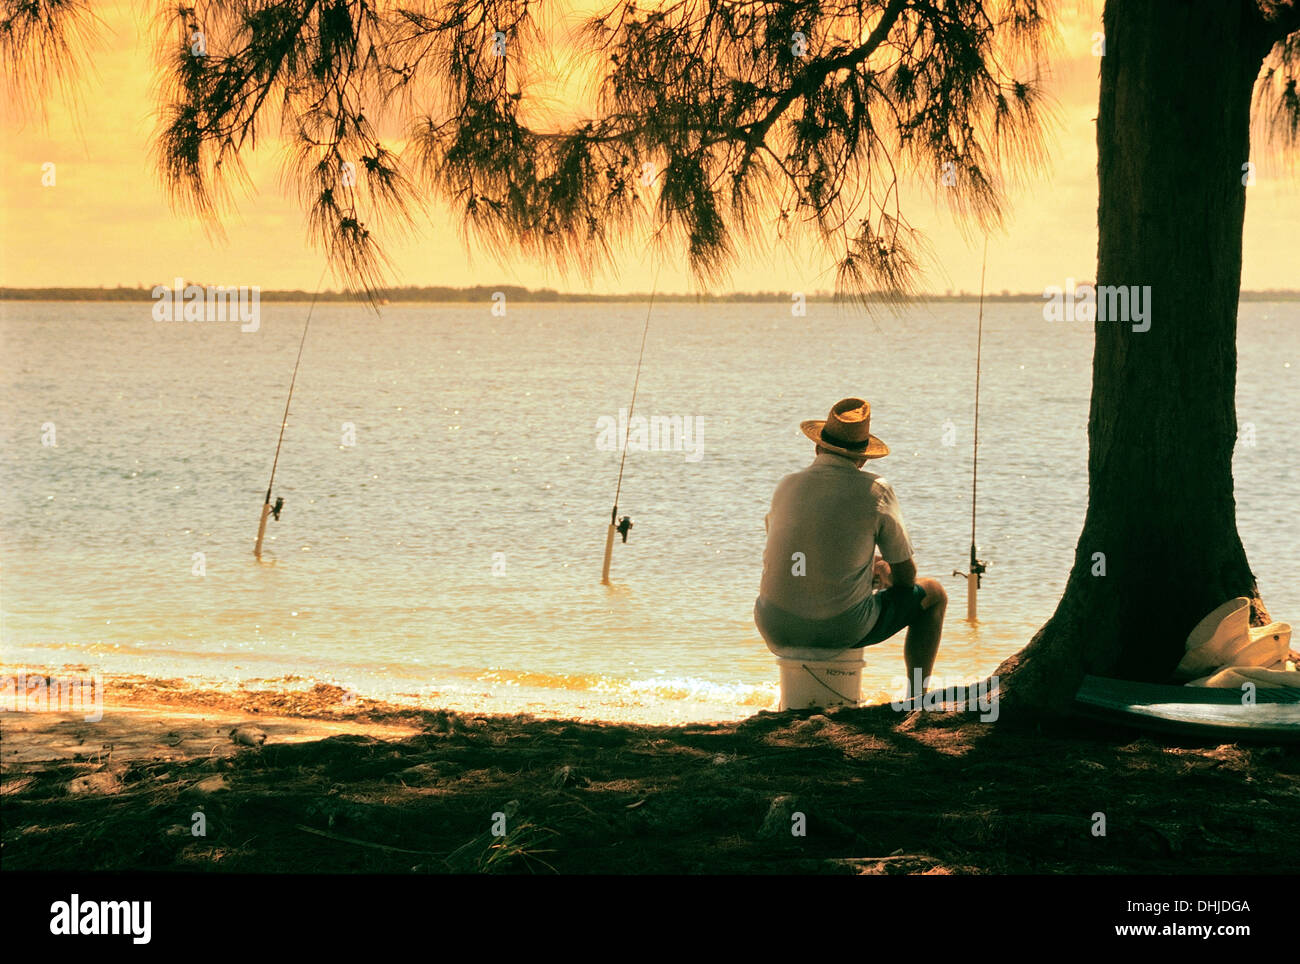 Solitary man fishing from shore with three poles. Stock Photo